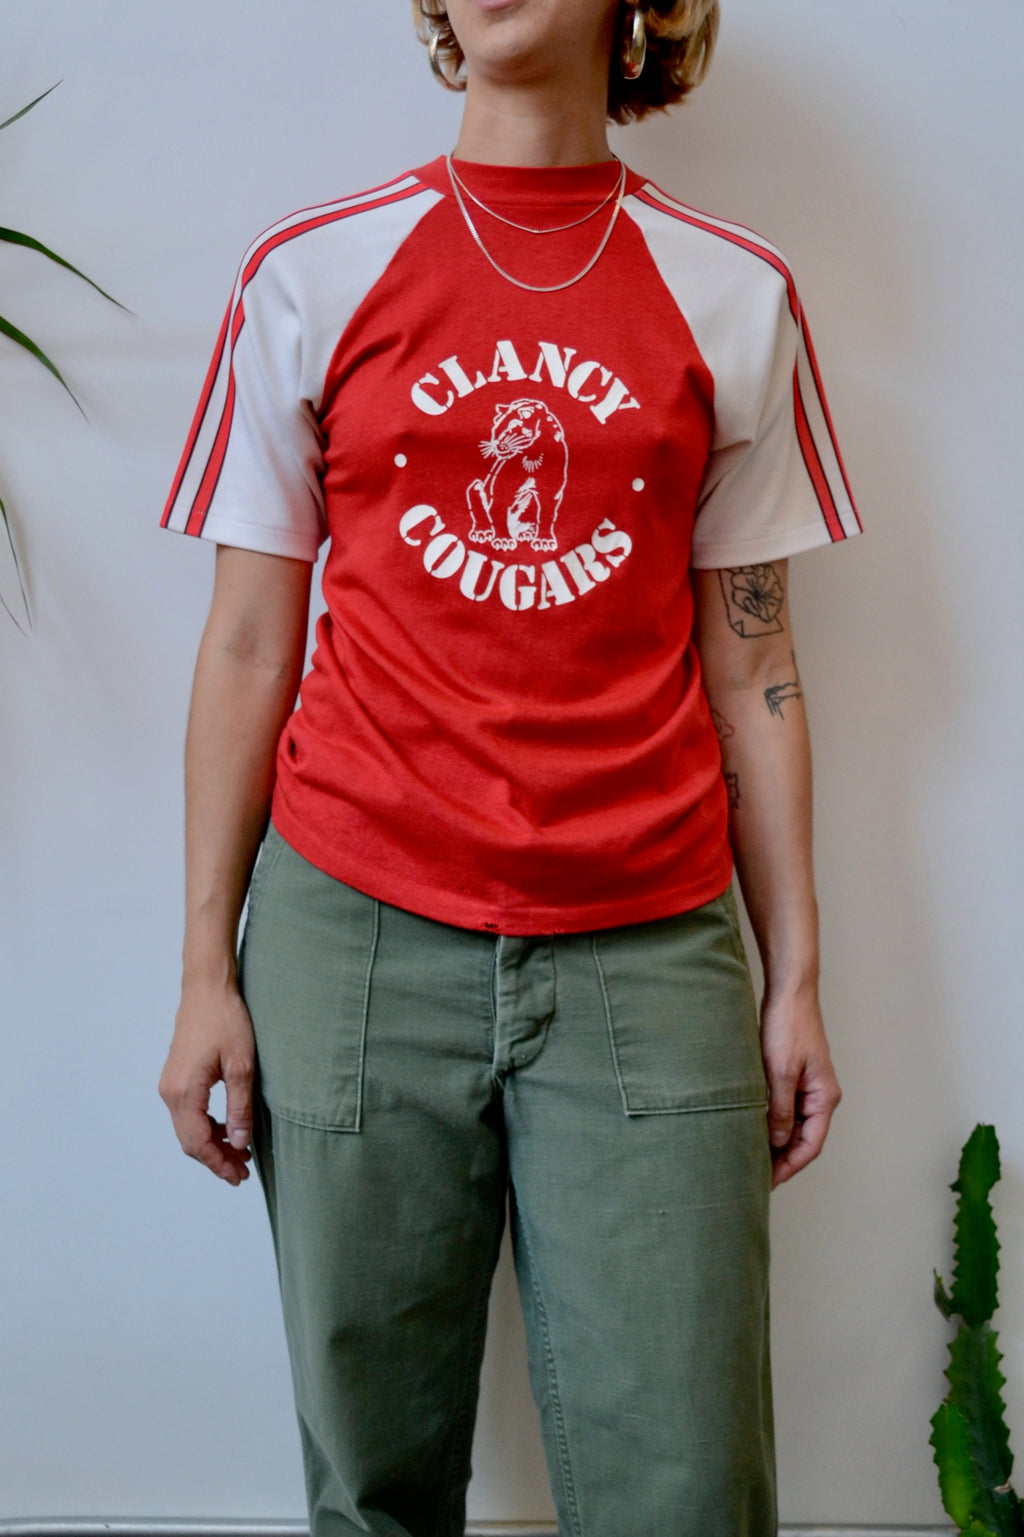 Clancy Cougars Tee